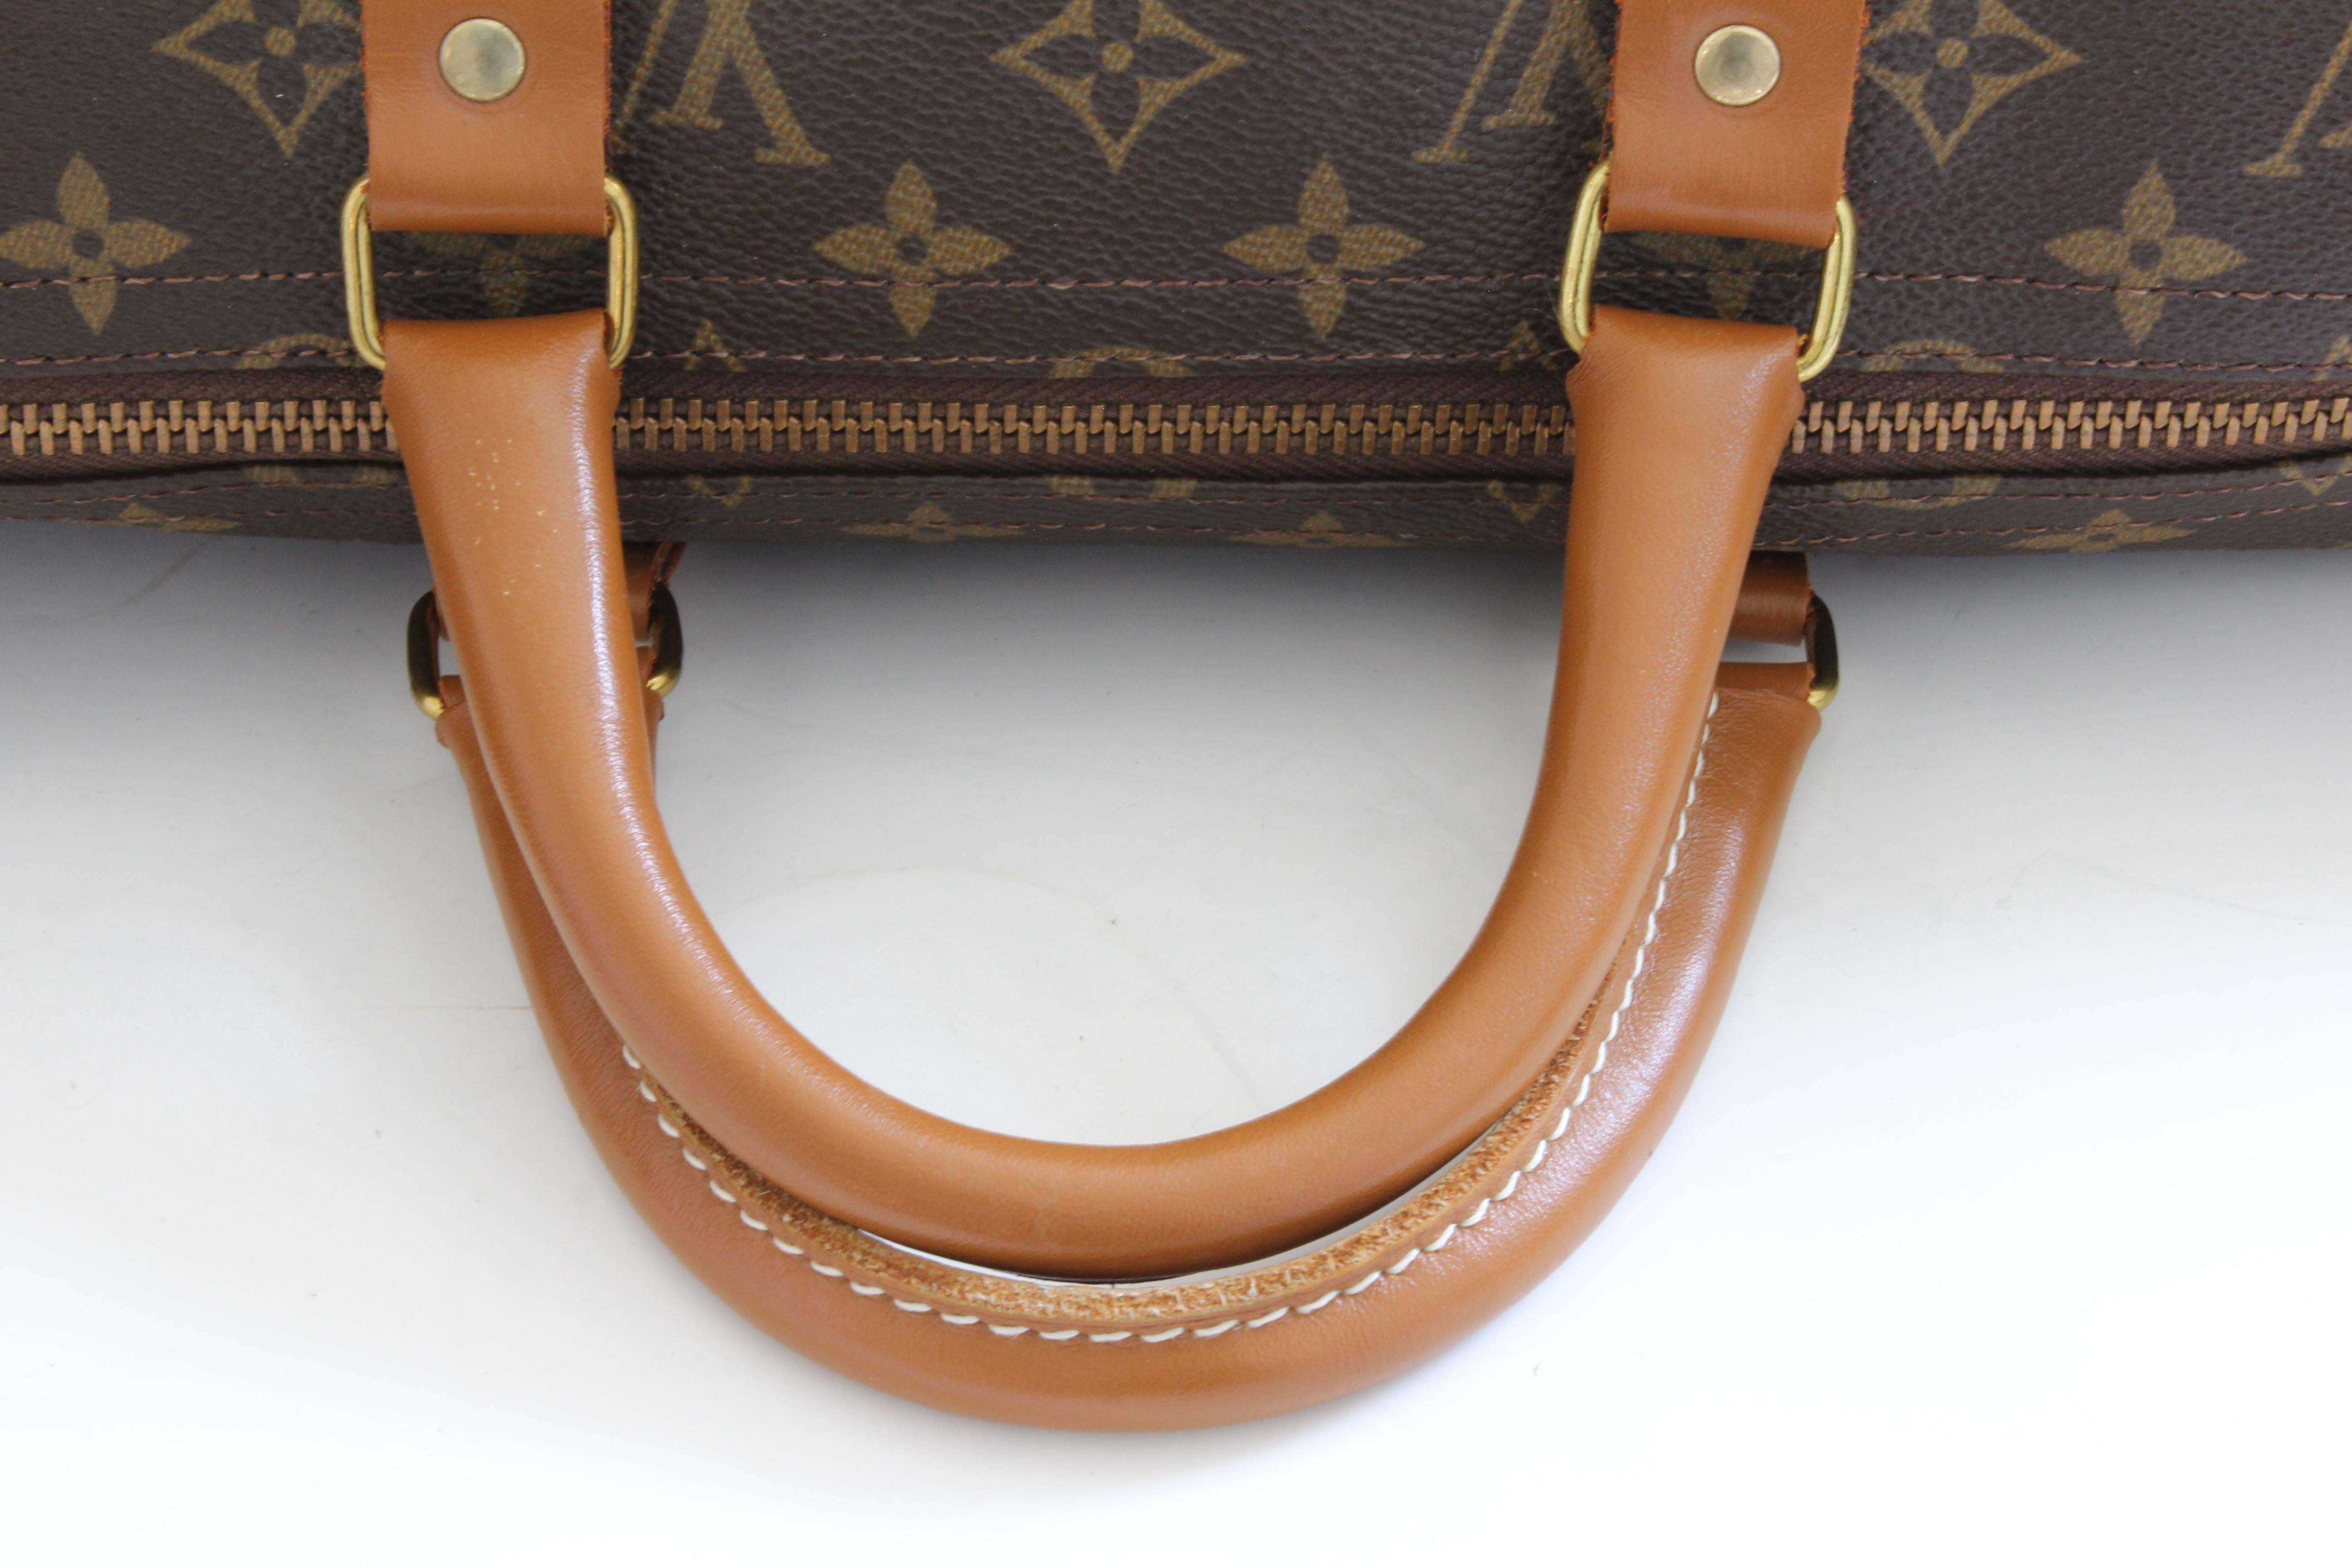 Louis Vuitton by The French Company Monogram Keepall Bag Travel Duffle 45cm  1